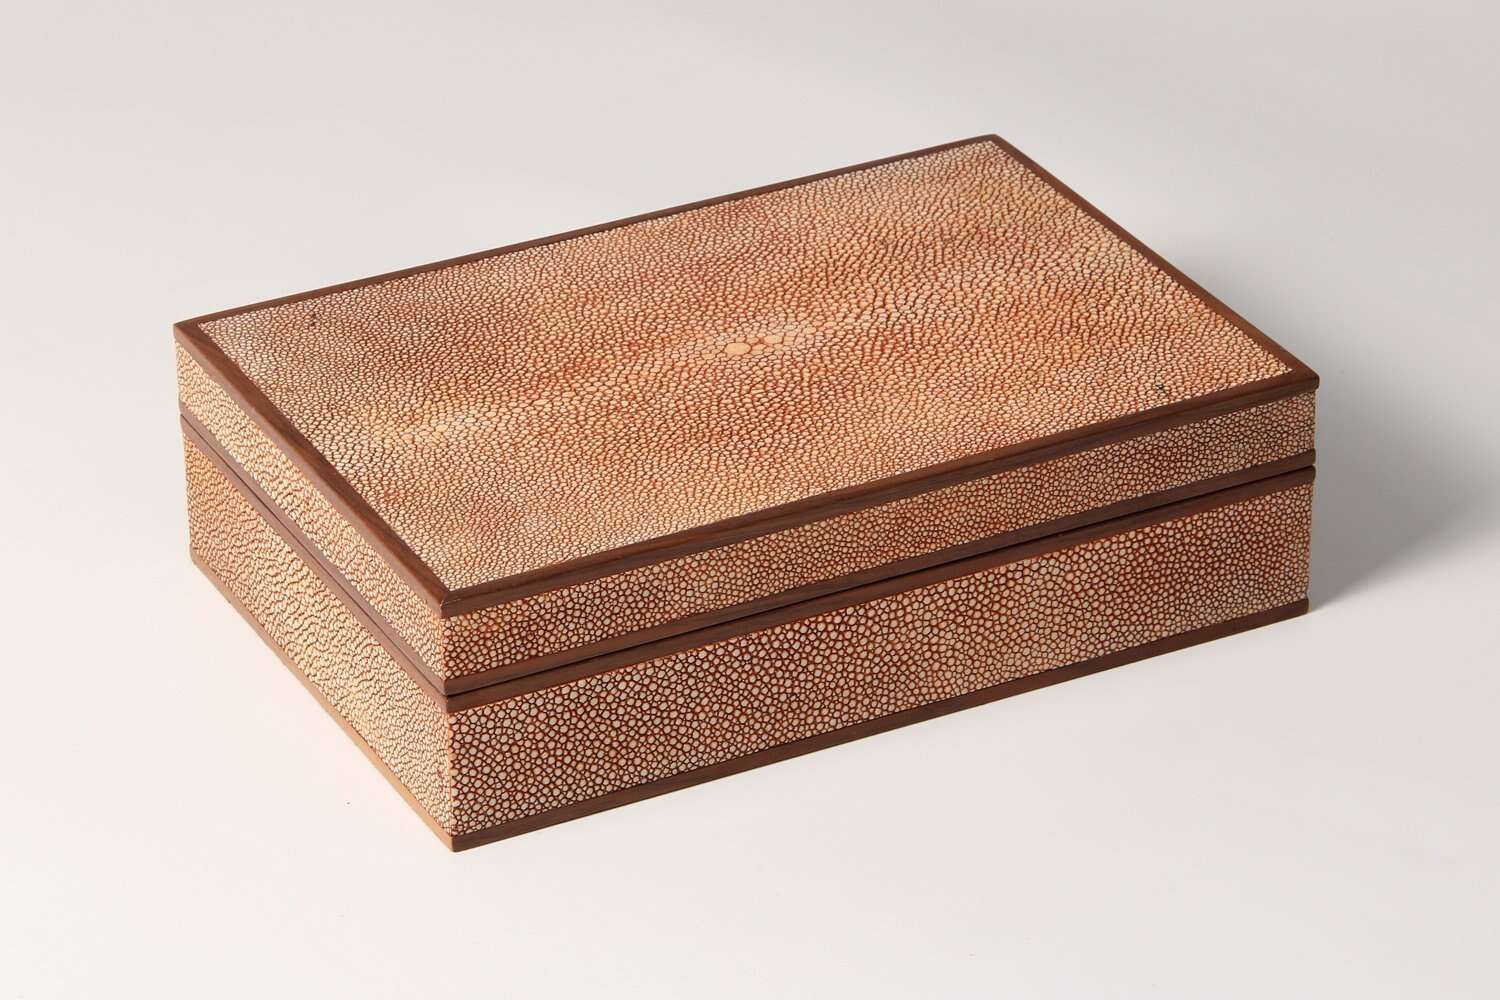 Gorgeous coral shagreen jewelry box